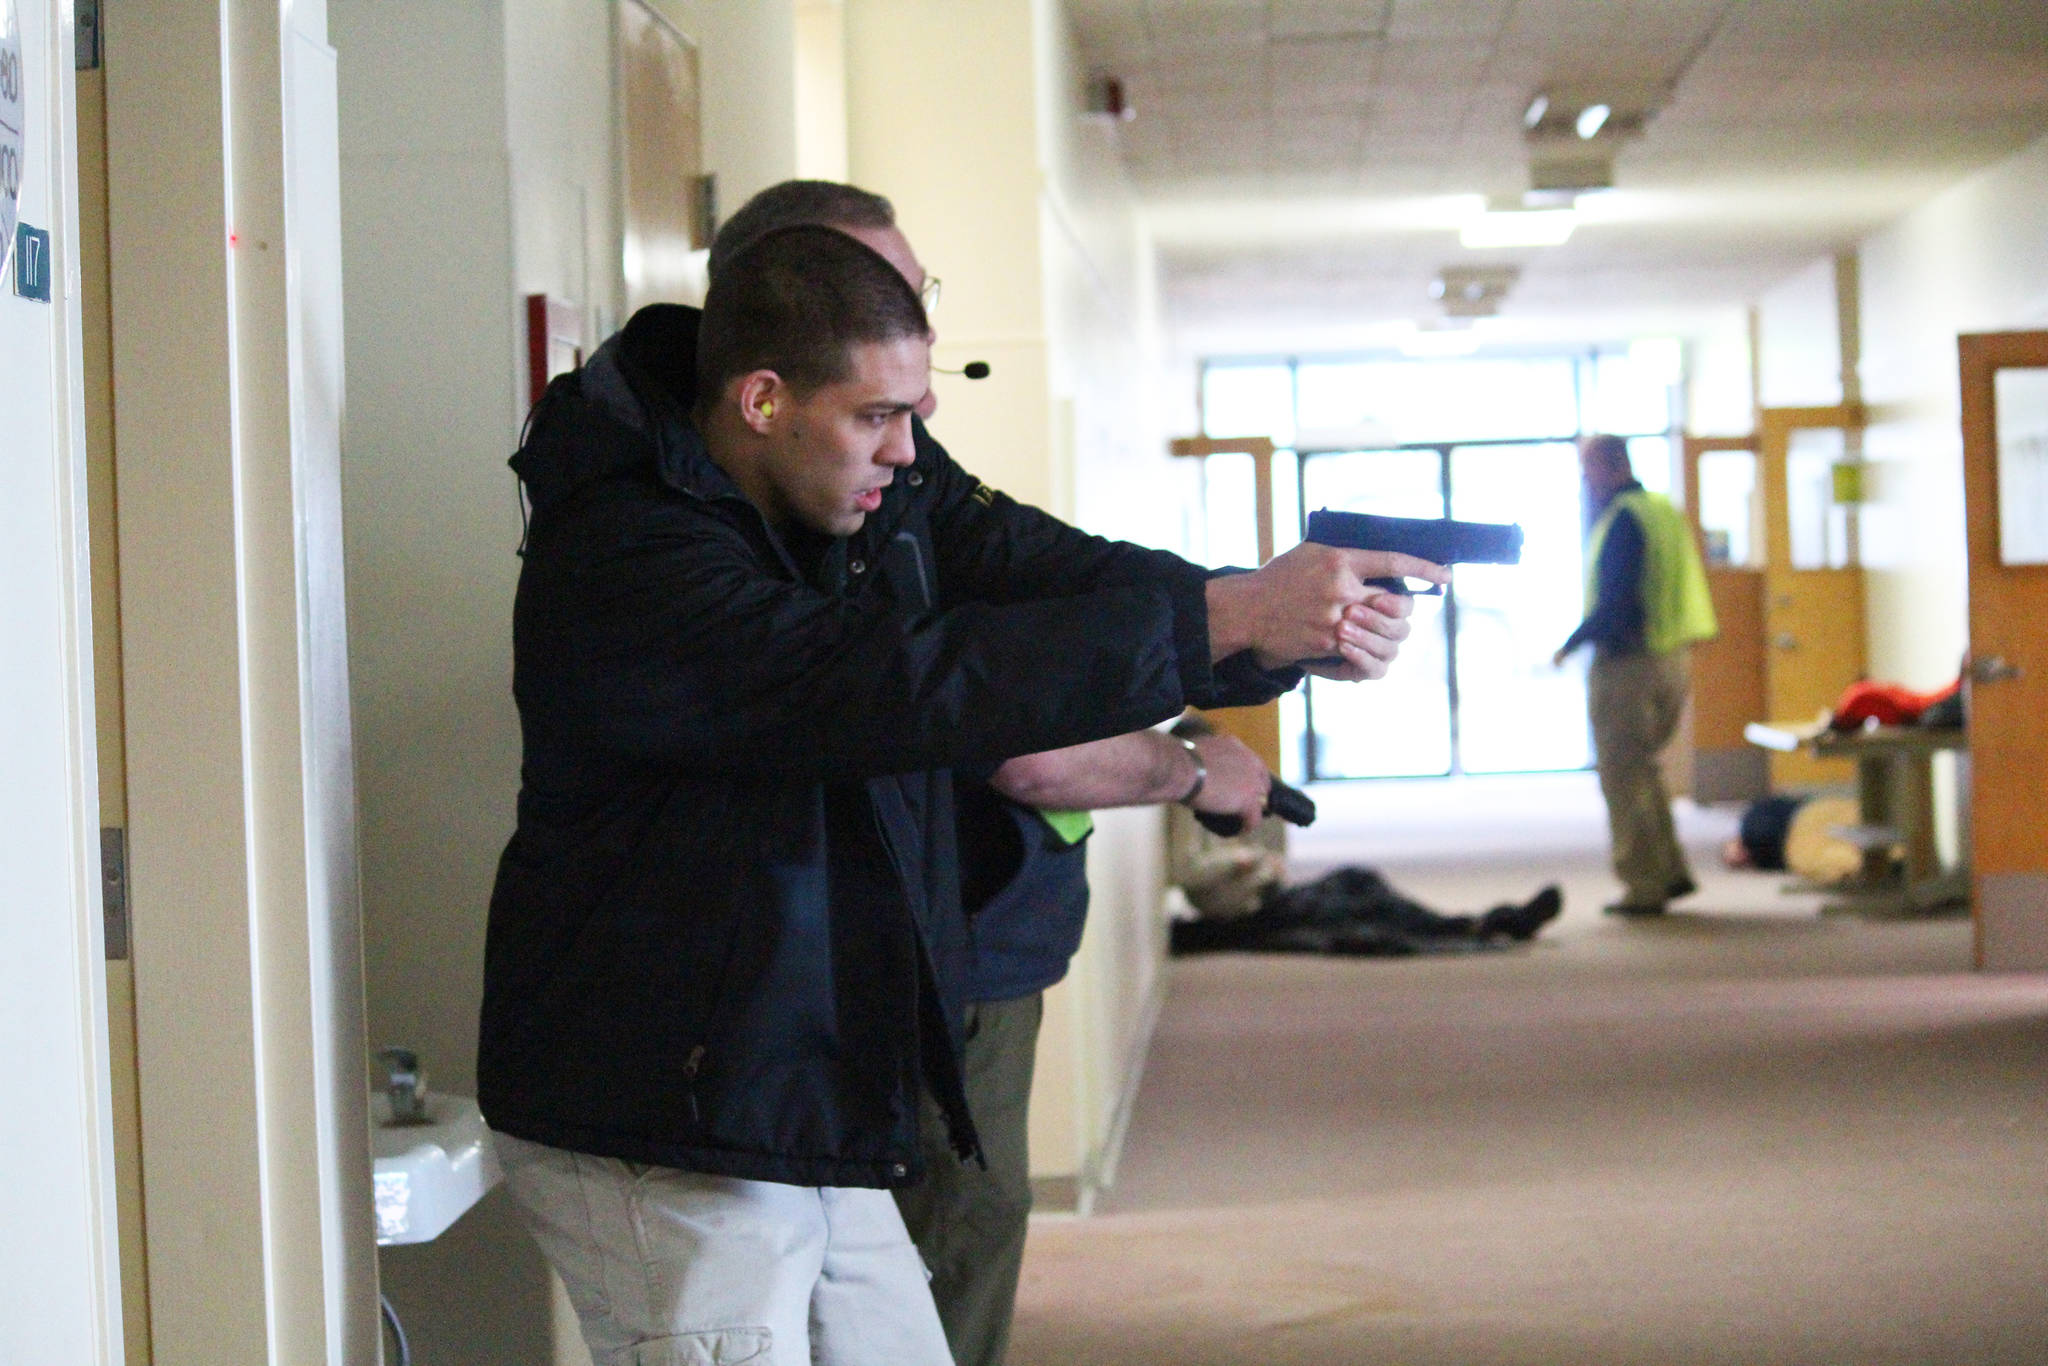 Volunteer Jason Palec holds a fake gun at the ready just before the start of an active shooter simulation Friday, Jan. 12, 2018 at the HERC building in Homer, Alaska. Several drills were run Friday to help police officers and first responders practice addressing emergencies in unison. (Photo by Megan Pacer/Homer News)